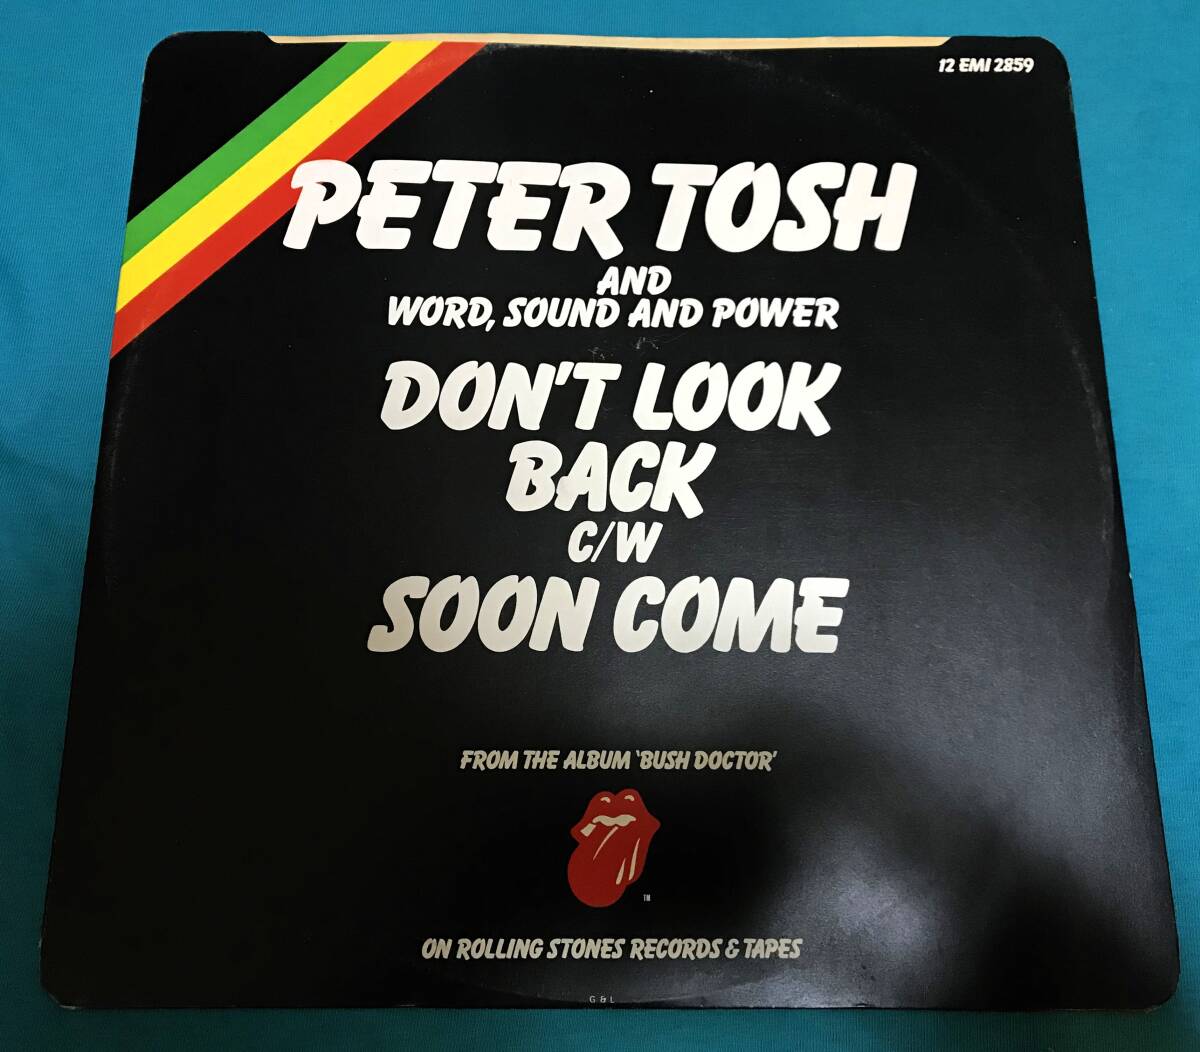 12”●Peter Tosh / Don’t Look Back UKオリジナル盤 Rolling Stones Records 12 EMI 2859の画像2